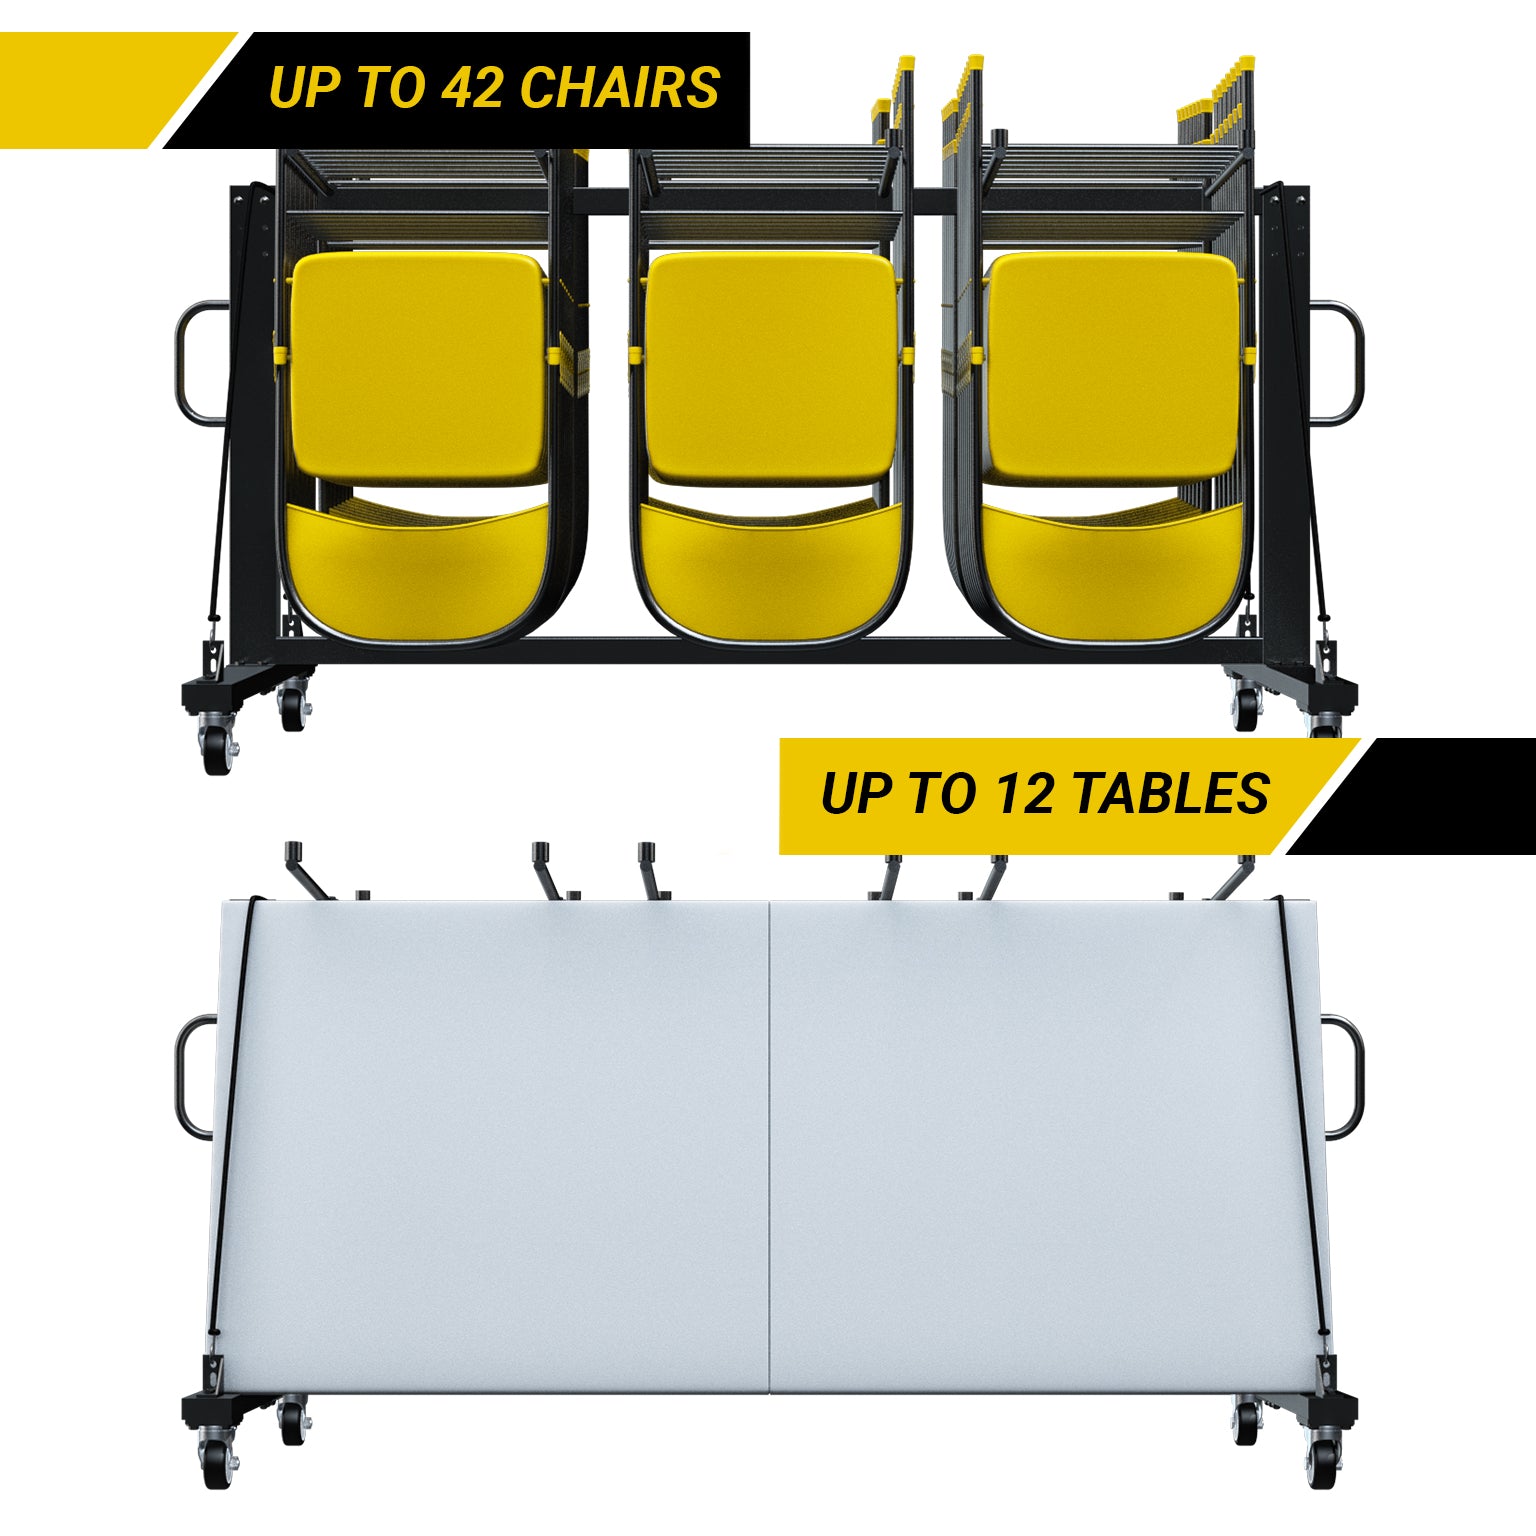 42 Chair Storage Rack - Innovative Folding Tables and Chairs Cart